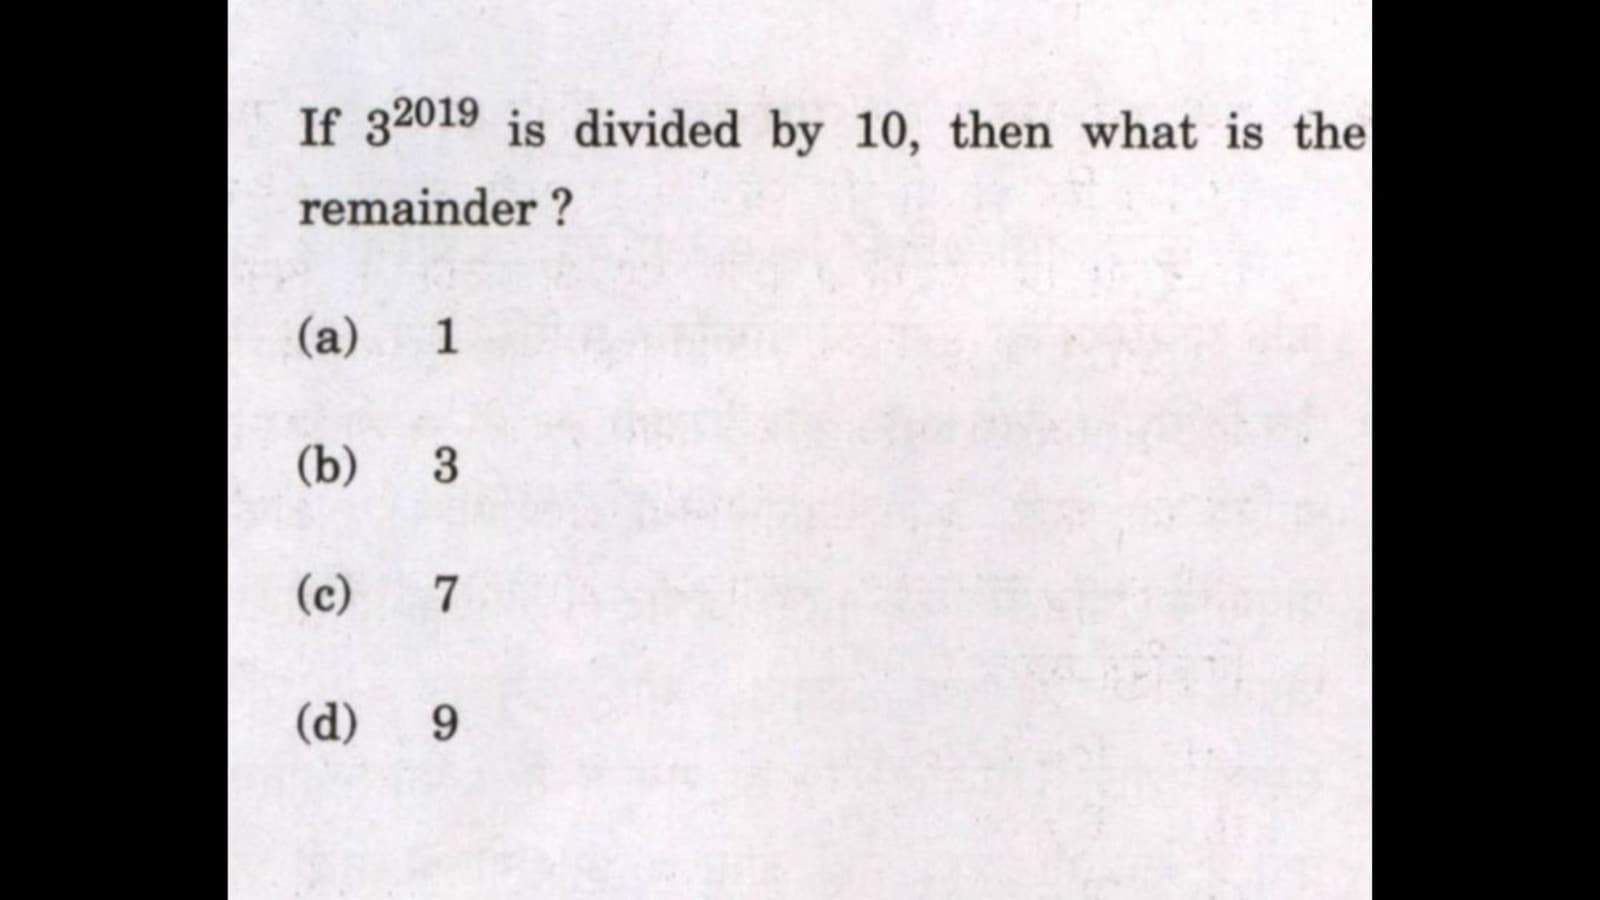 How quickly can you solve this CSAT practice question without using a calculator?